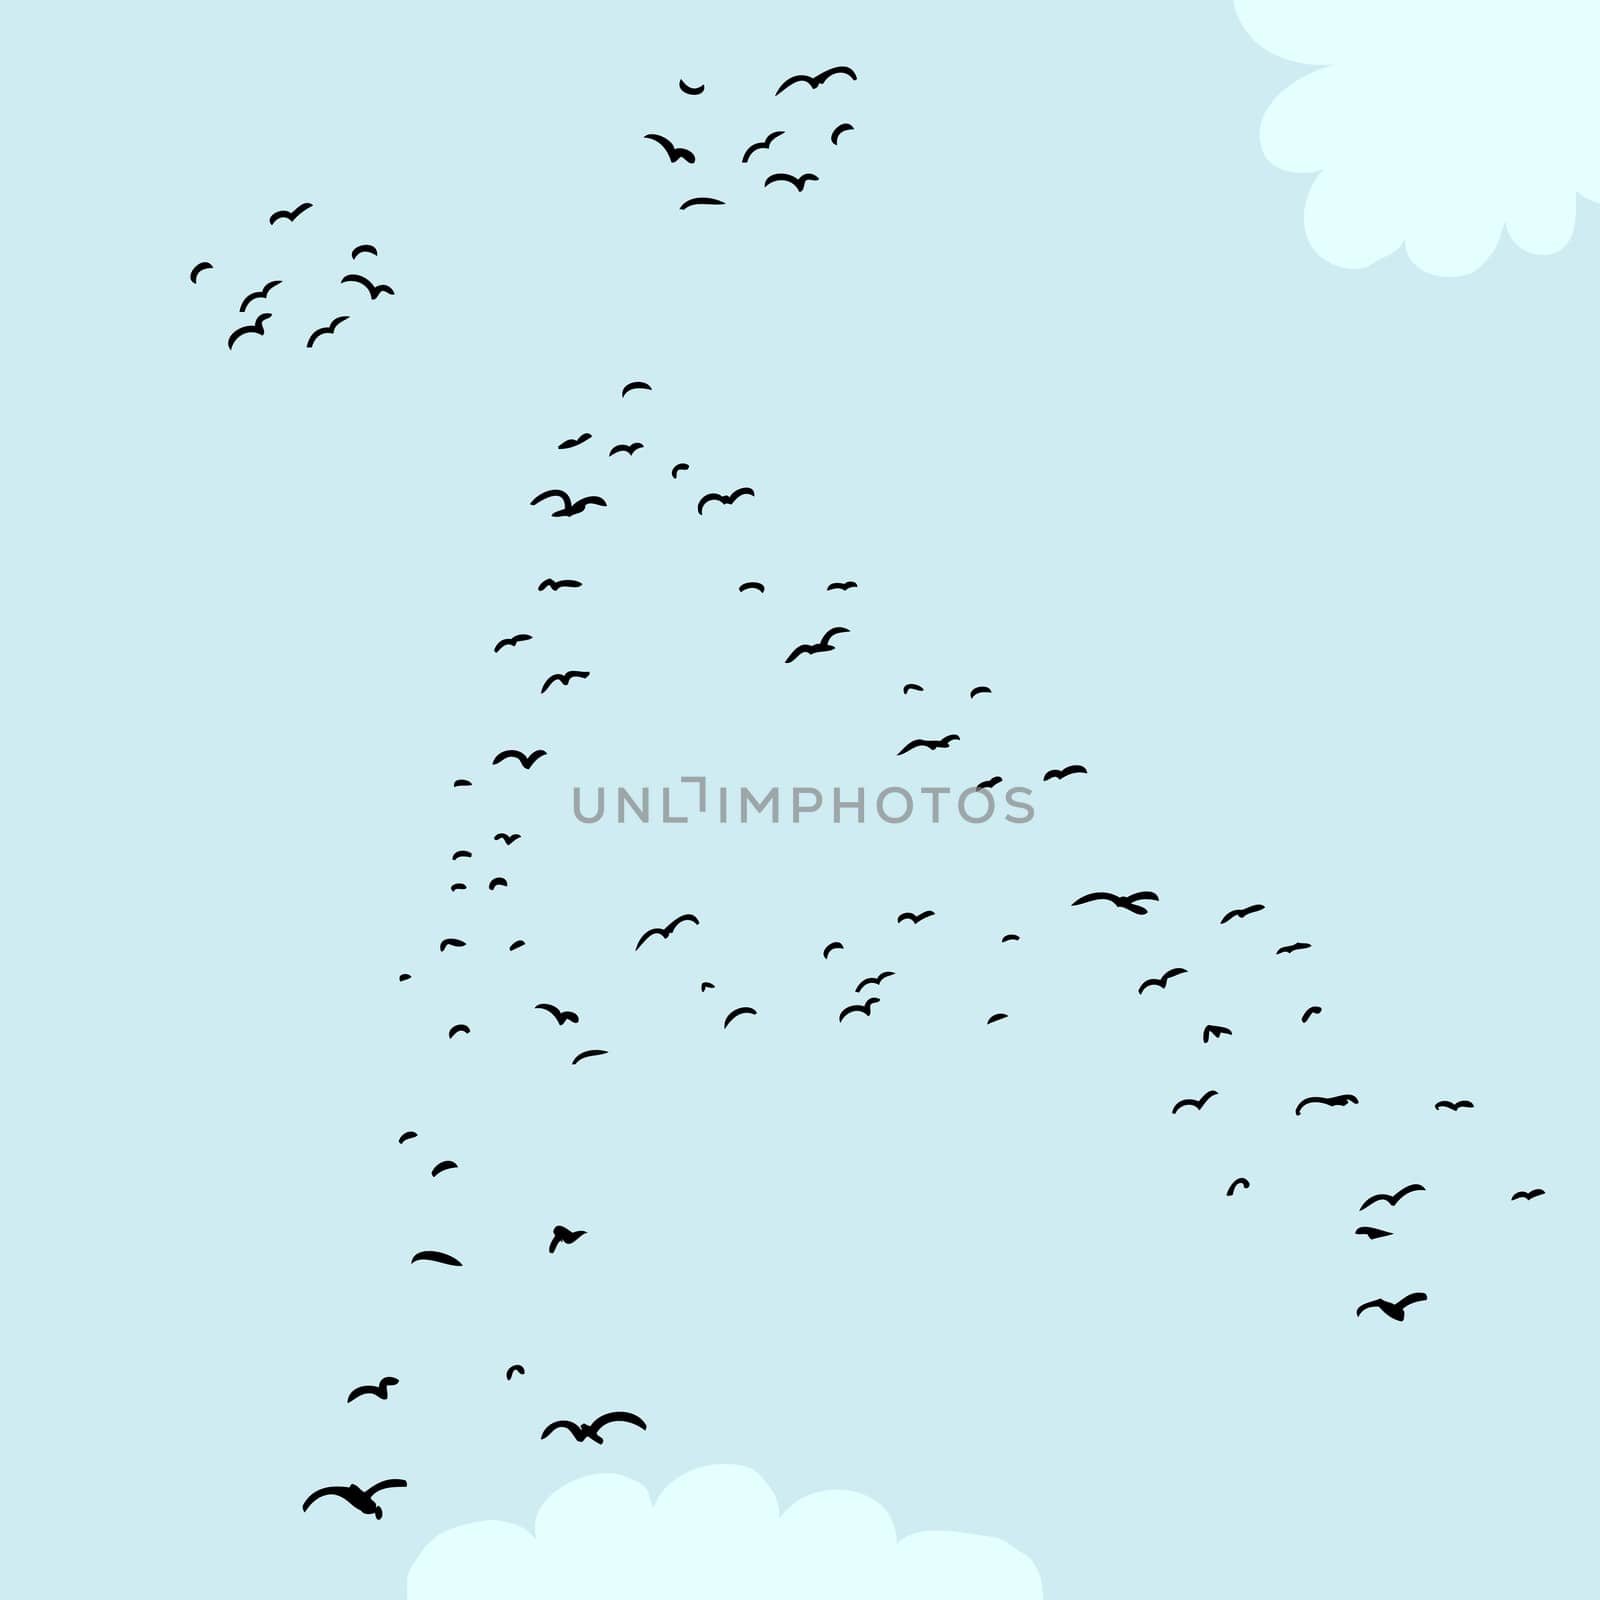 Bird Formation In Diacrtic A by TheBlackRhino